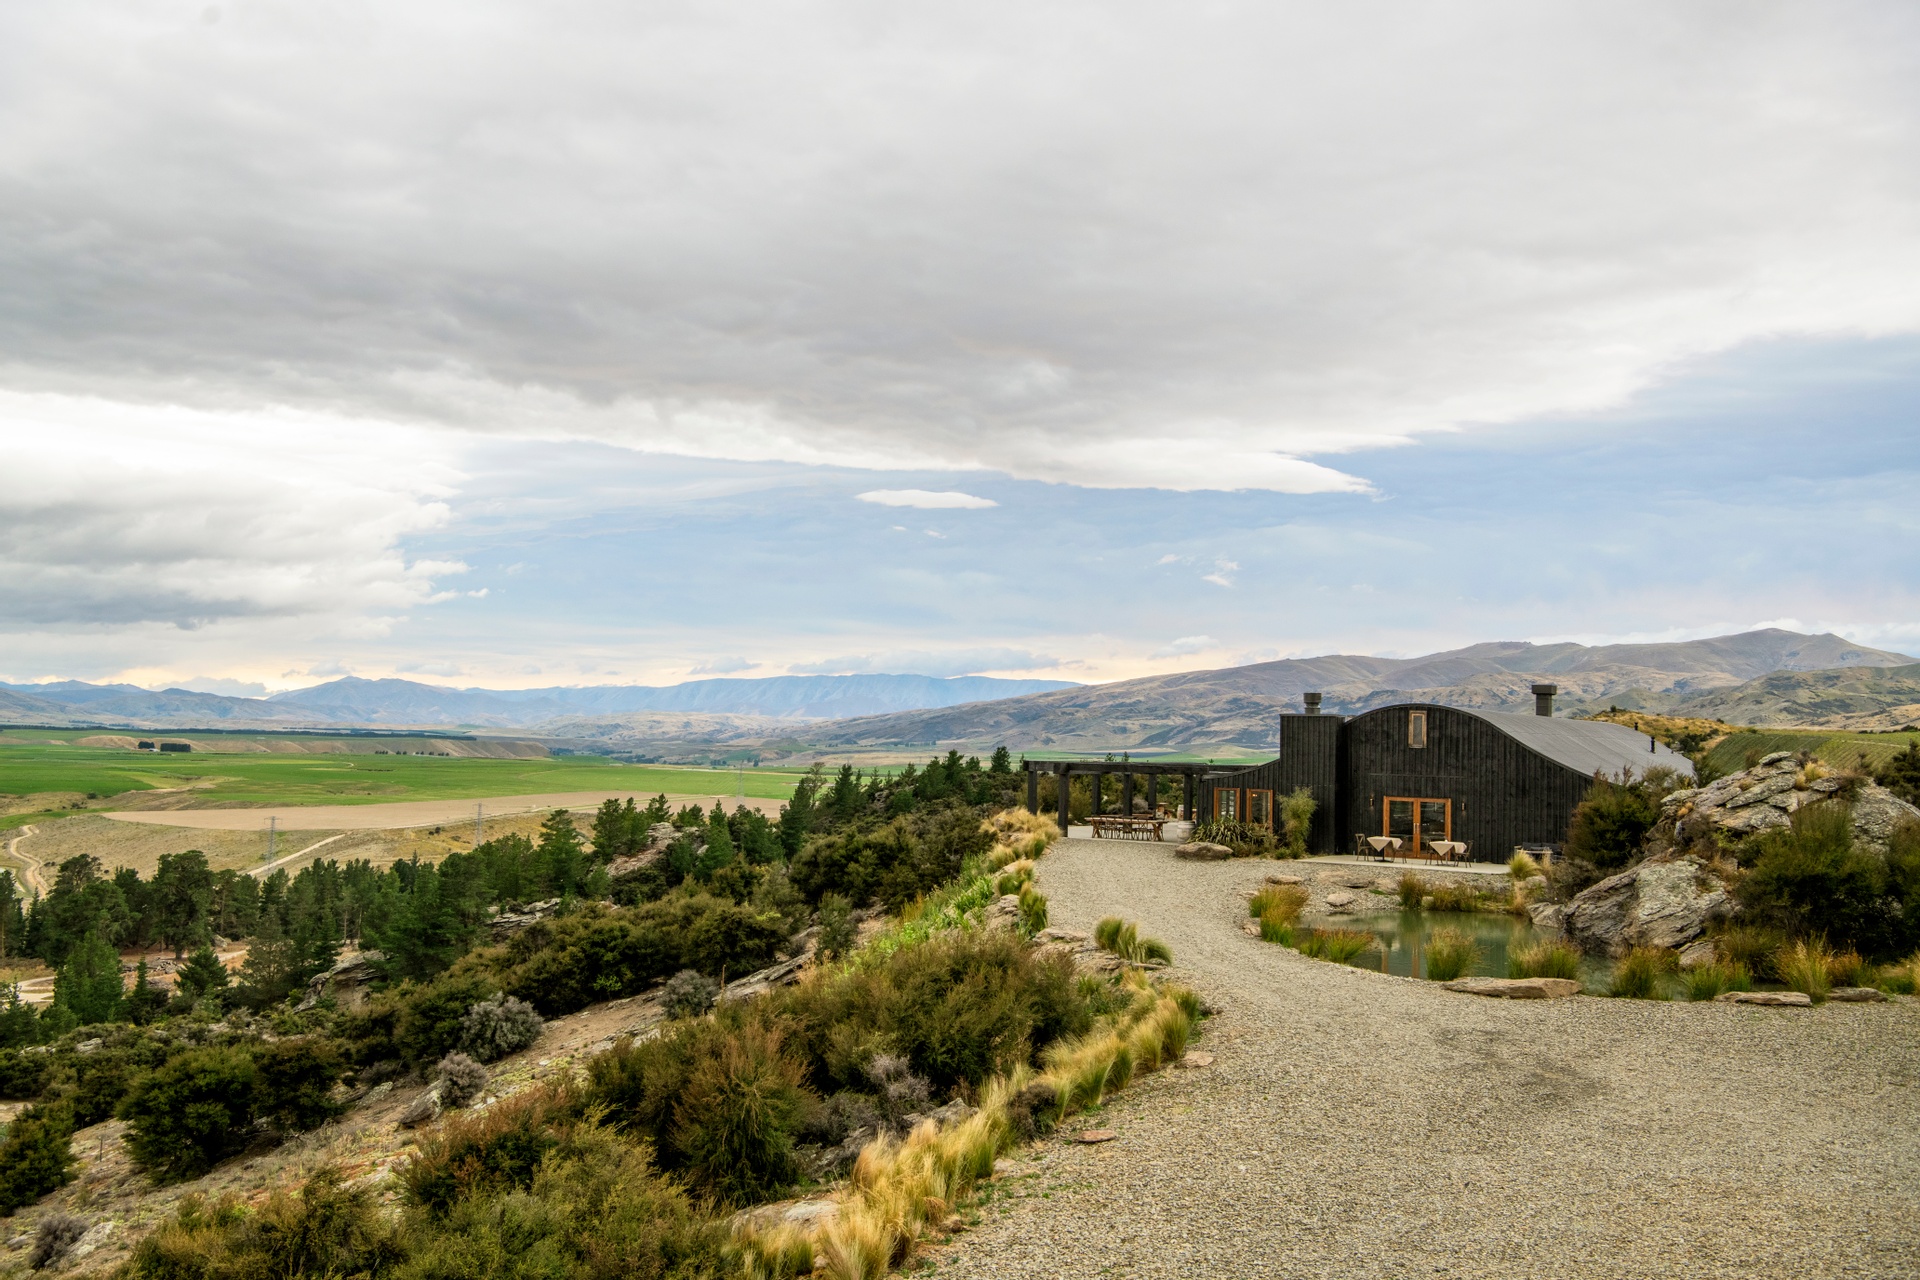 Central Otago Restaurant at Tarras Image Courtesy Alastair Guthry and TNZ